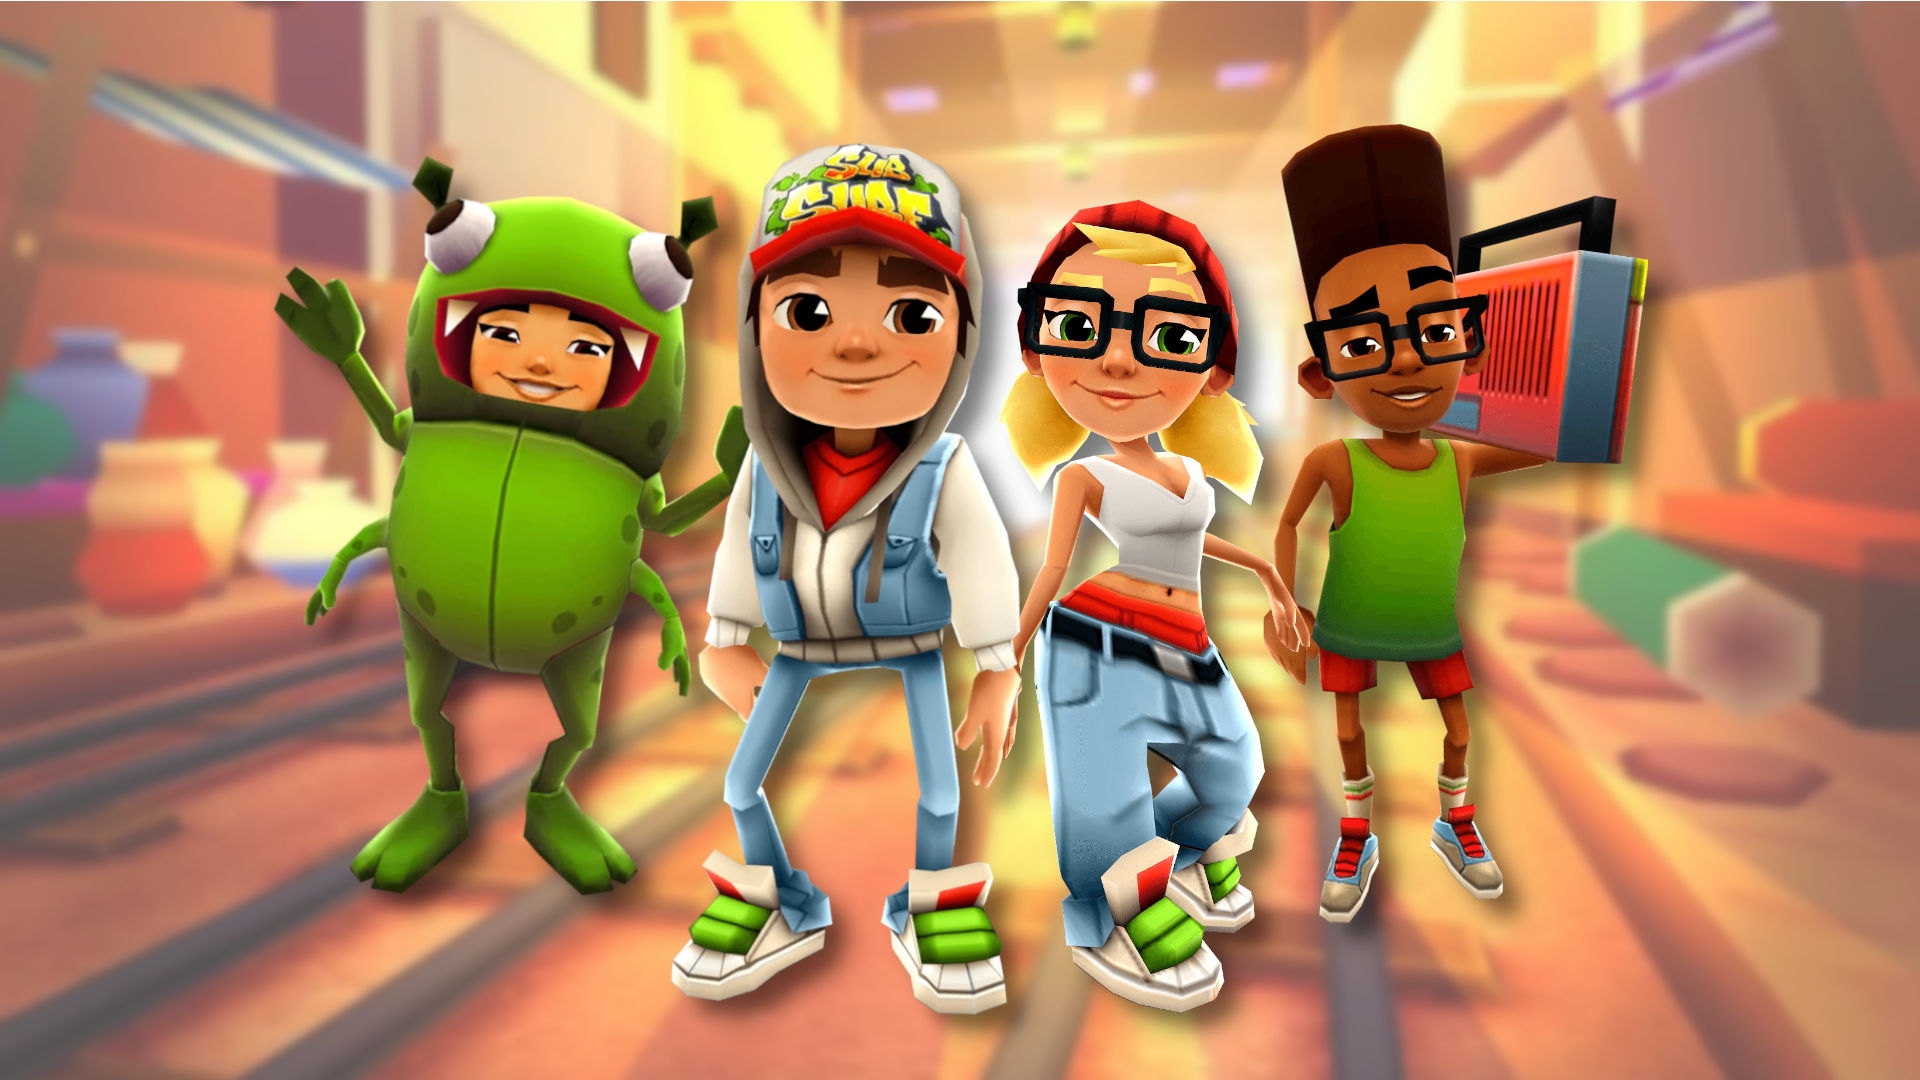 About: Subway Surfers Match (Google Play version)